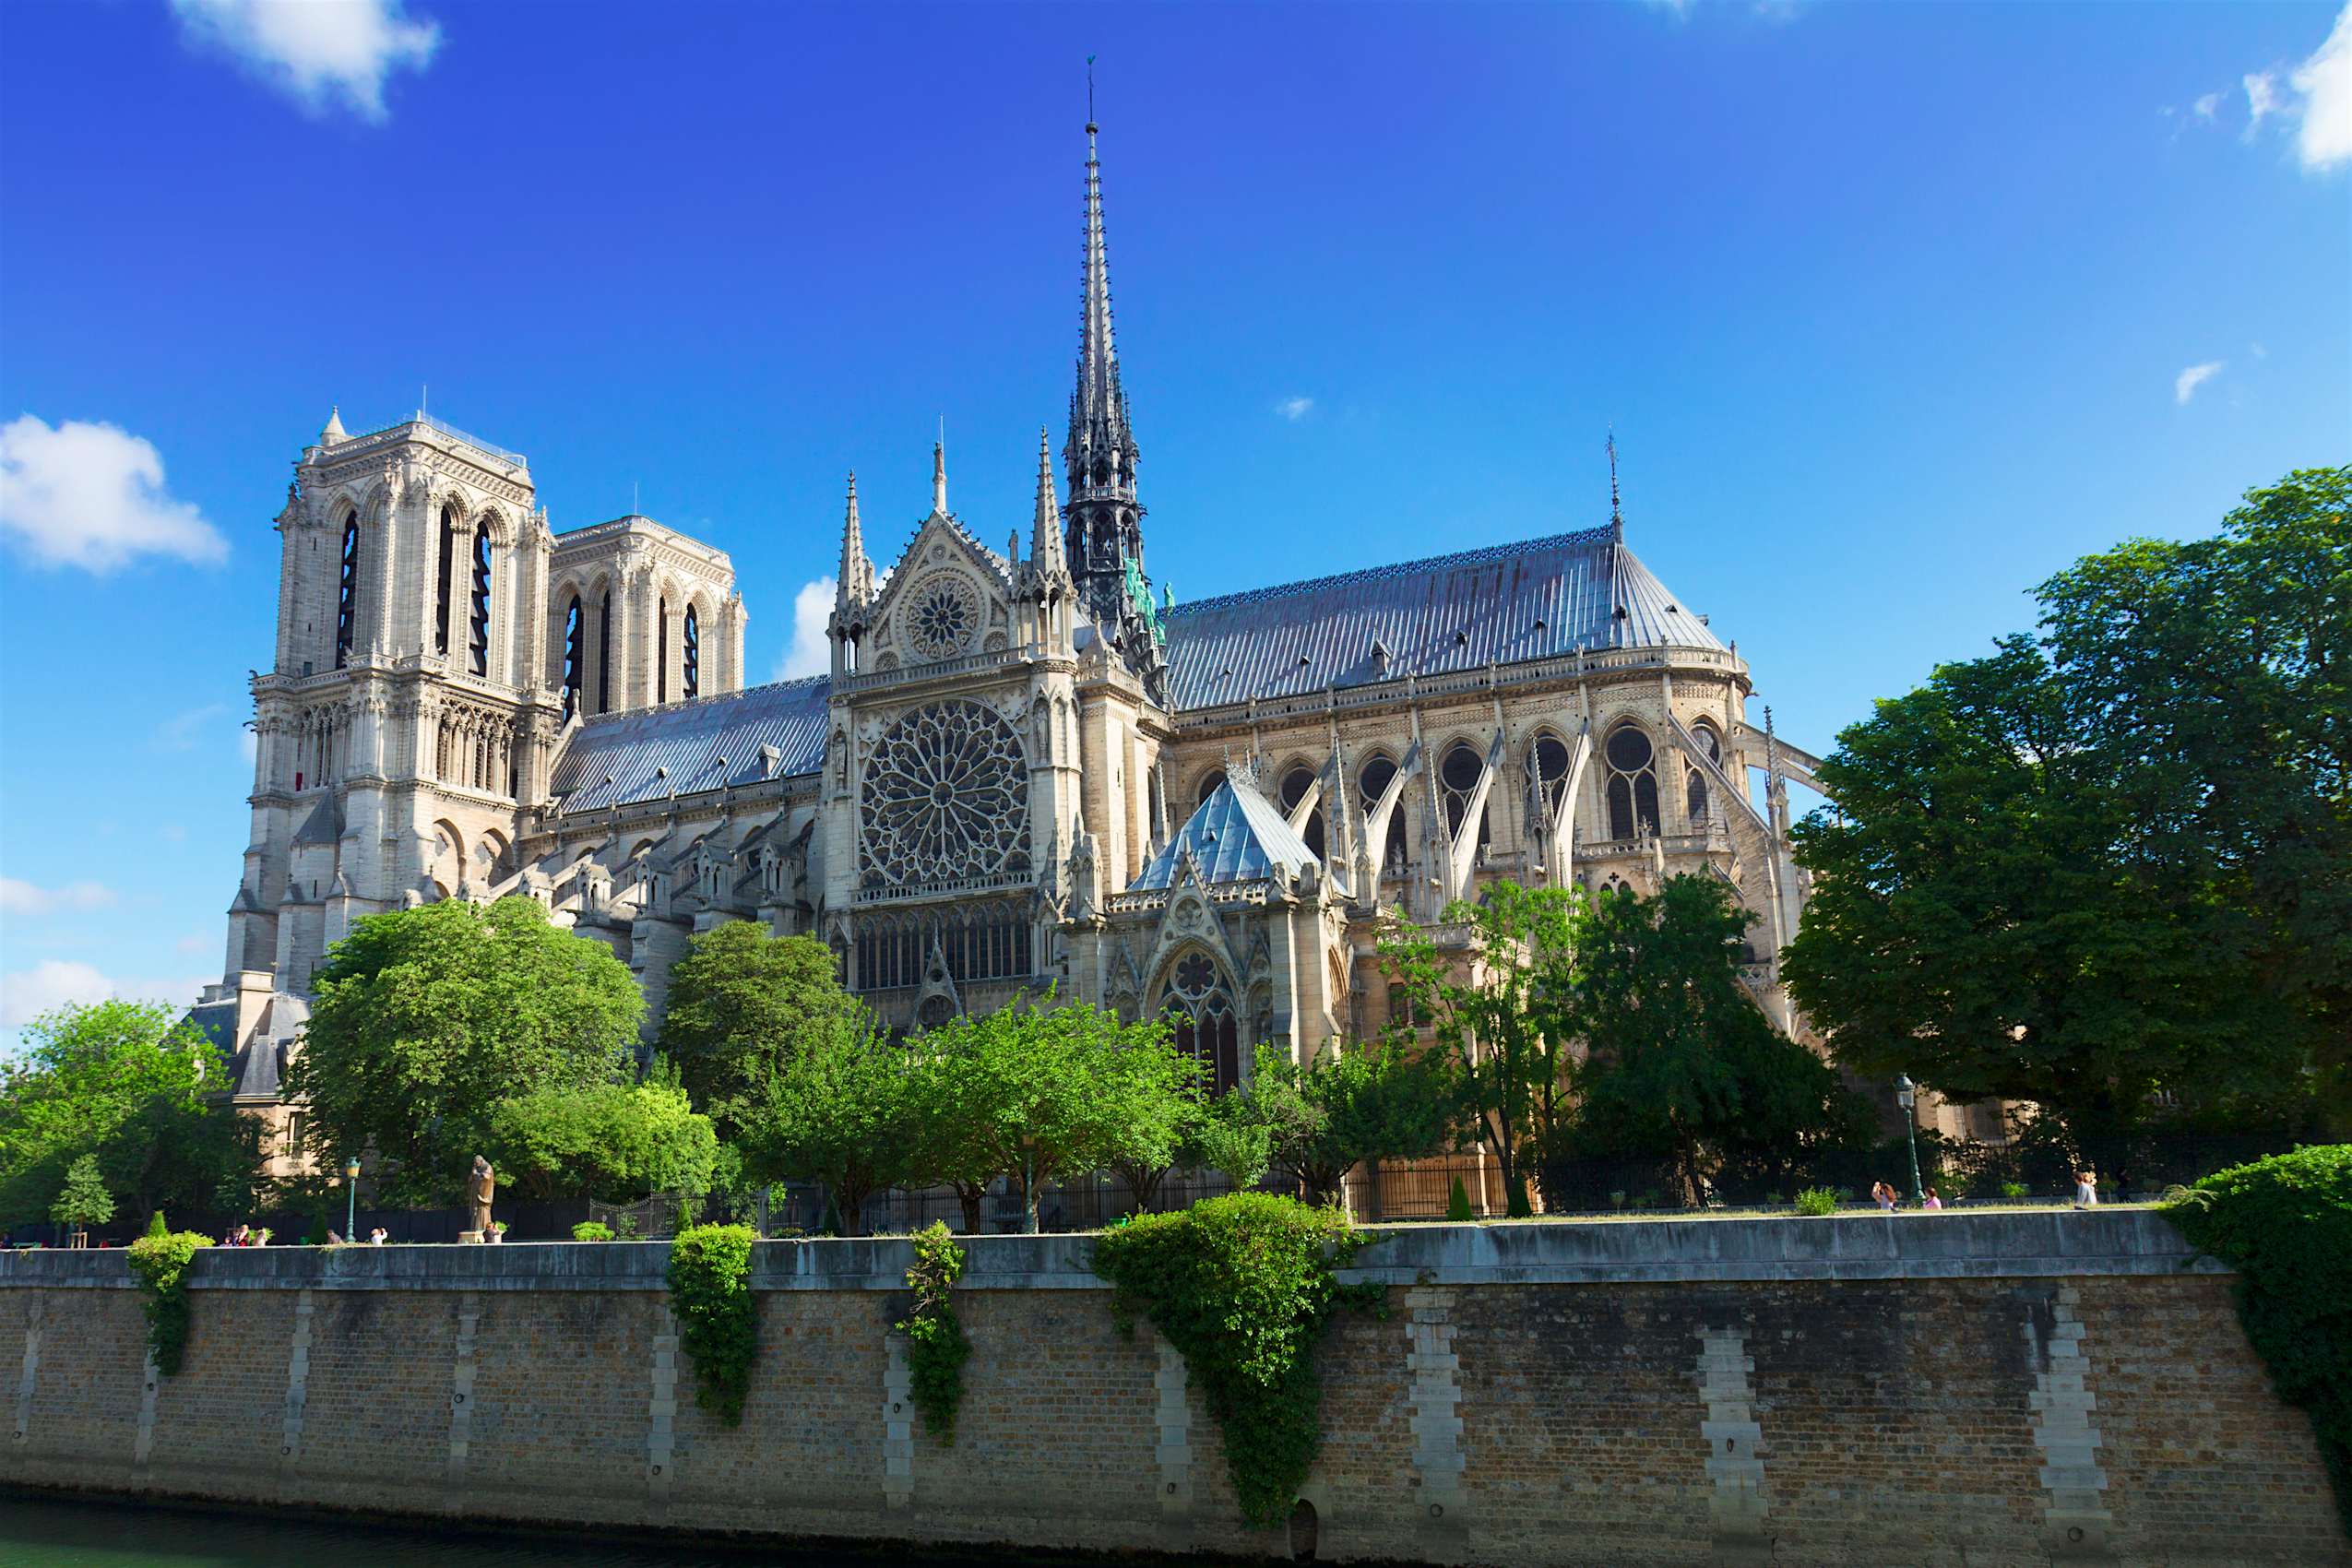 The Notre Dame cathedral repairs have gone through a major step